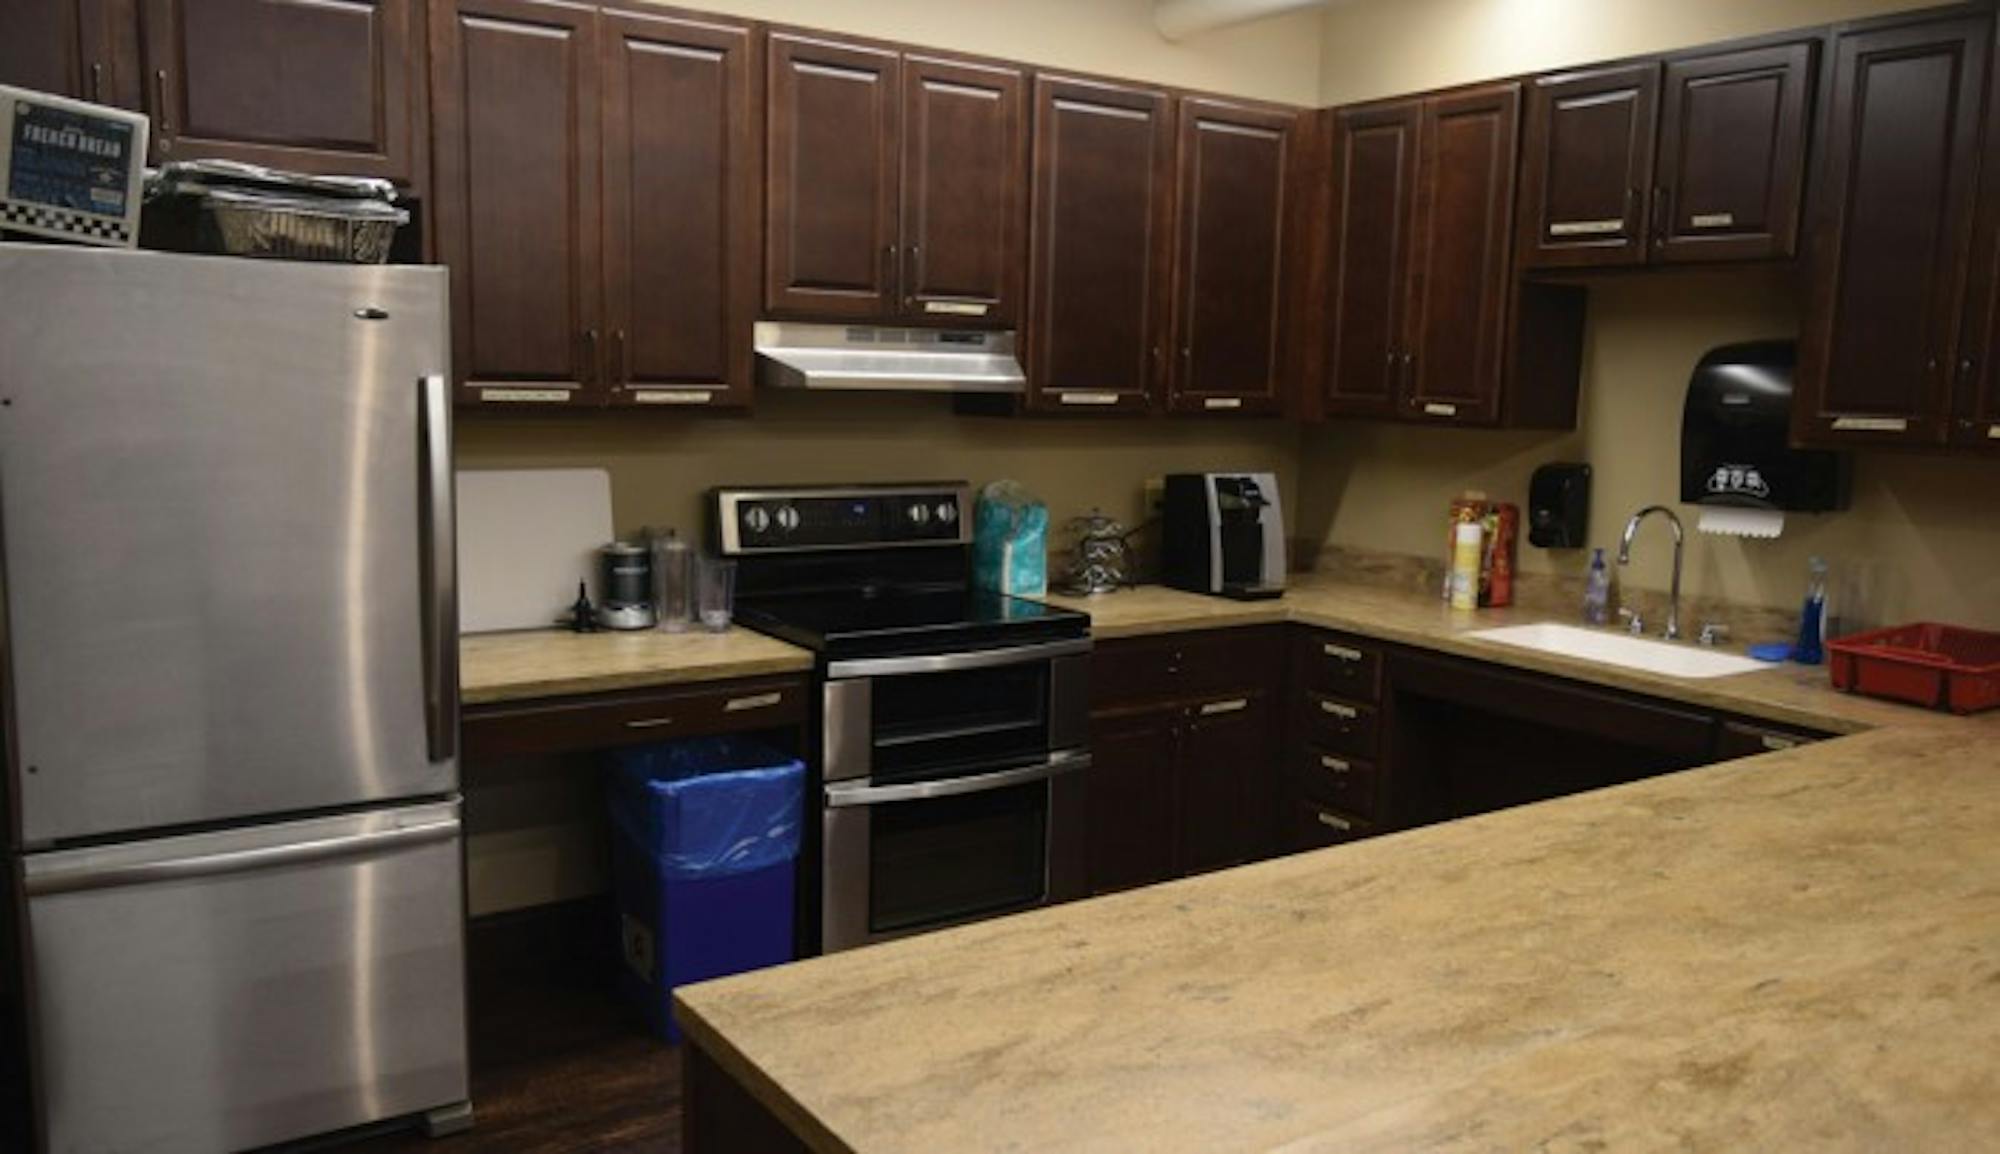 Each floor in the hall hosts a kitchen, the result of a year-long remodeling process of the dorm, during which residents lived in Pangborn Hall, the current “swing dorm” for halls undergoing renovations.